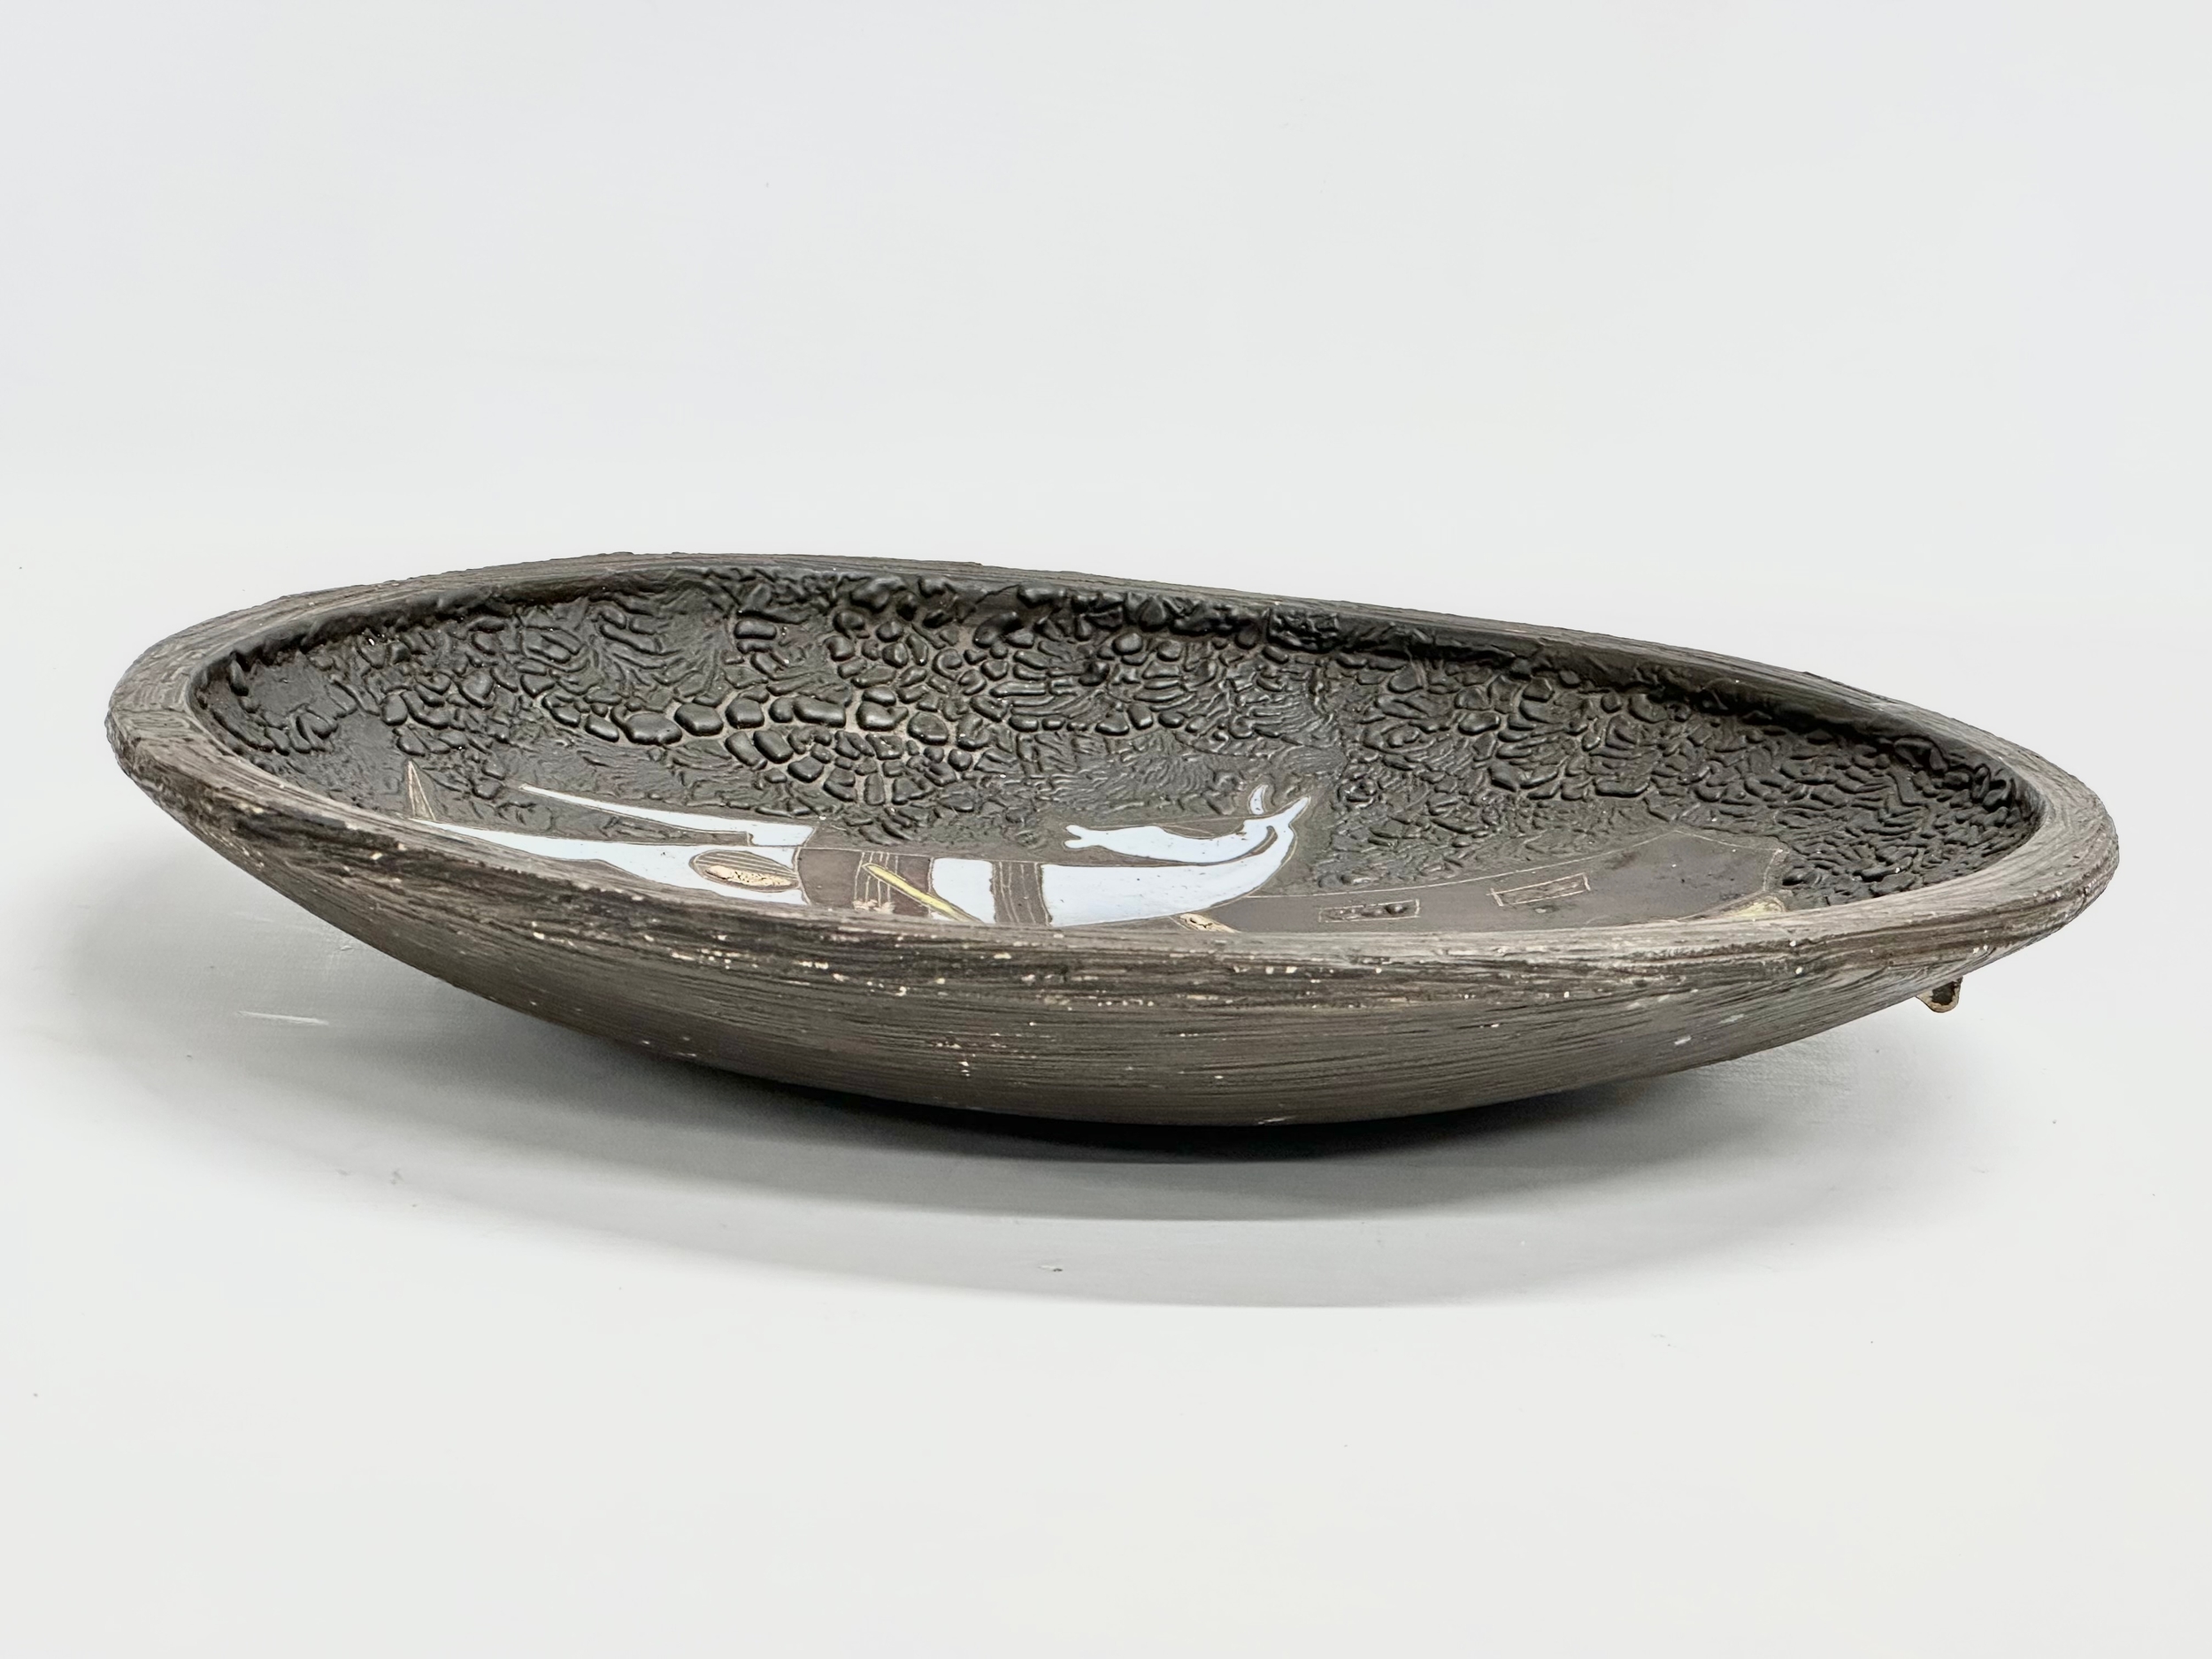 A large Mid 20th Century wall plaque/bowl by renowned pottery maker Manuel Benlloch. 31x36x5cm - Image 5 of 7